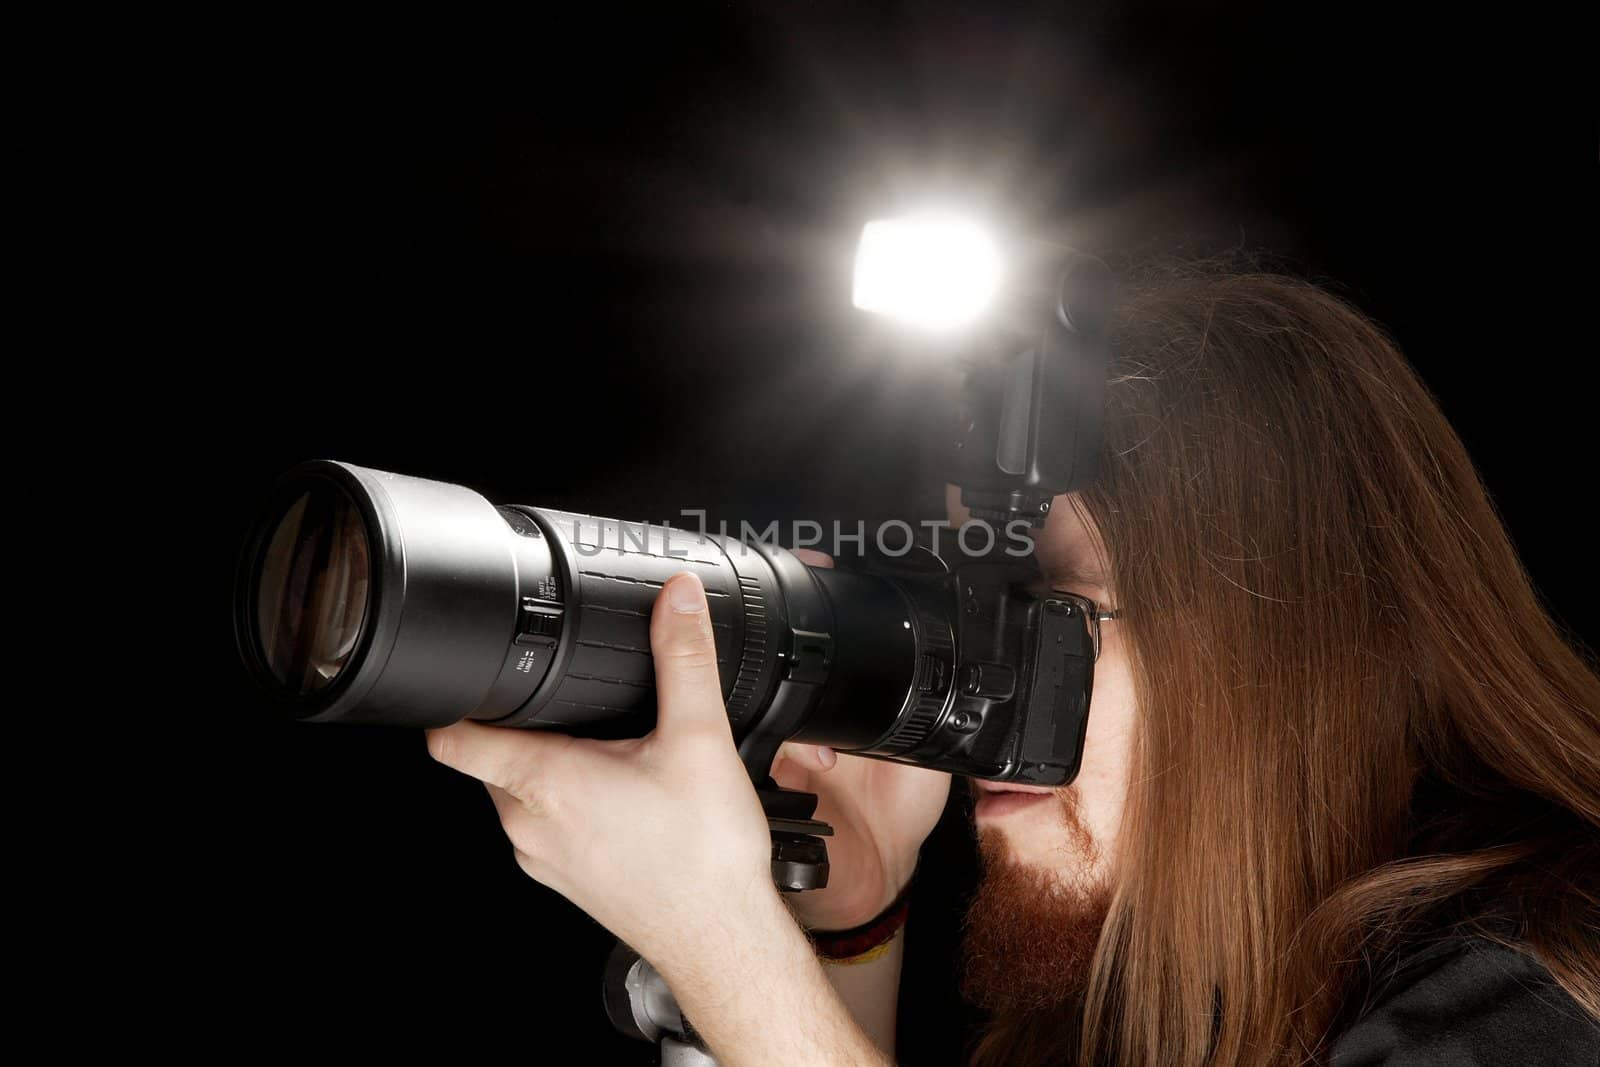 Photographer using DSLR camera with flash and telephoto lens